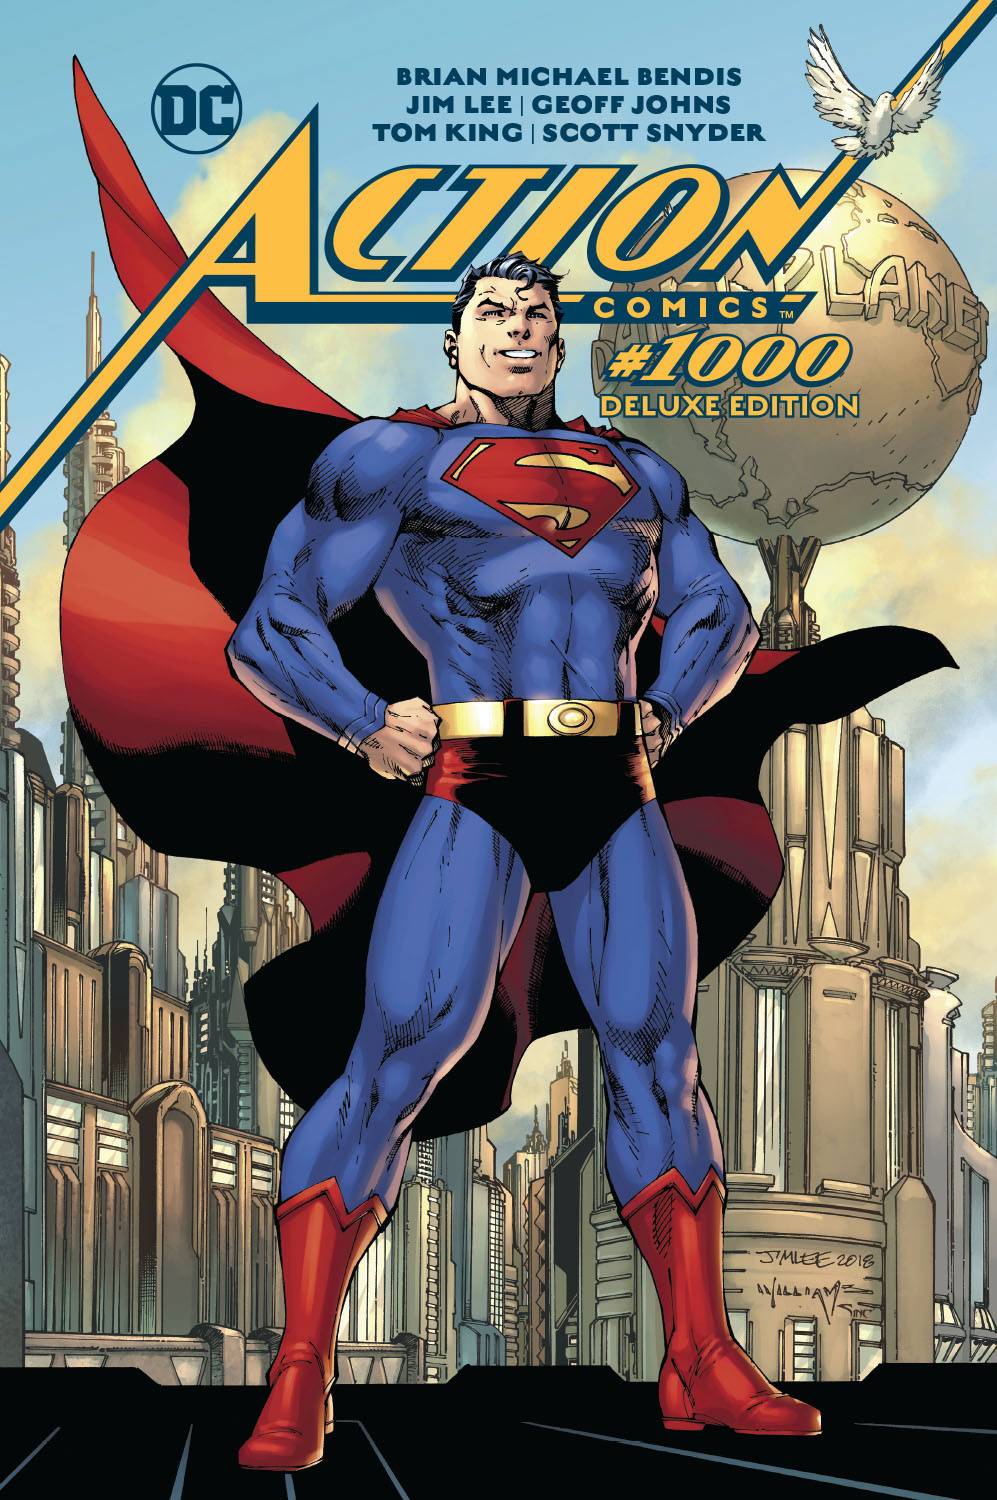 Photo of Action Comics Issue 1000 the Deluxe Edition HC comic sold by Stronghold Collectibles